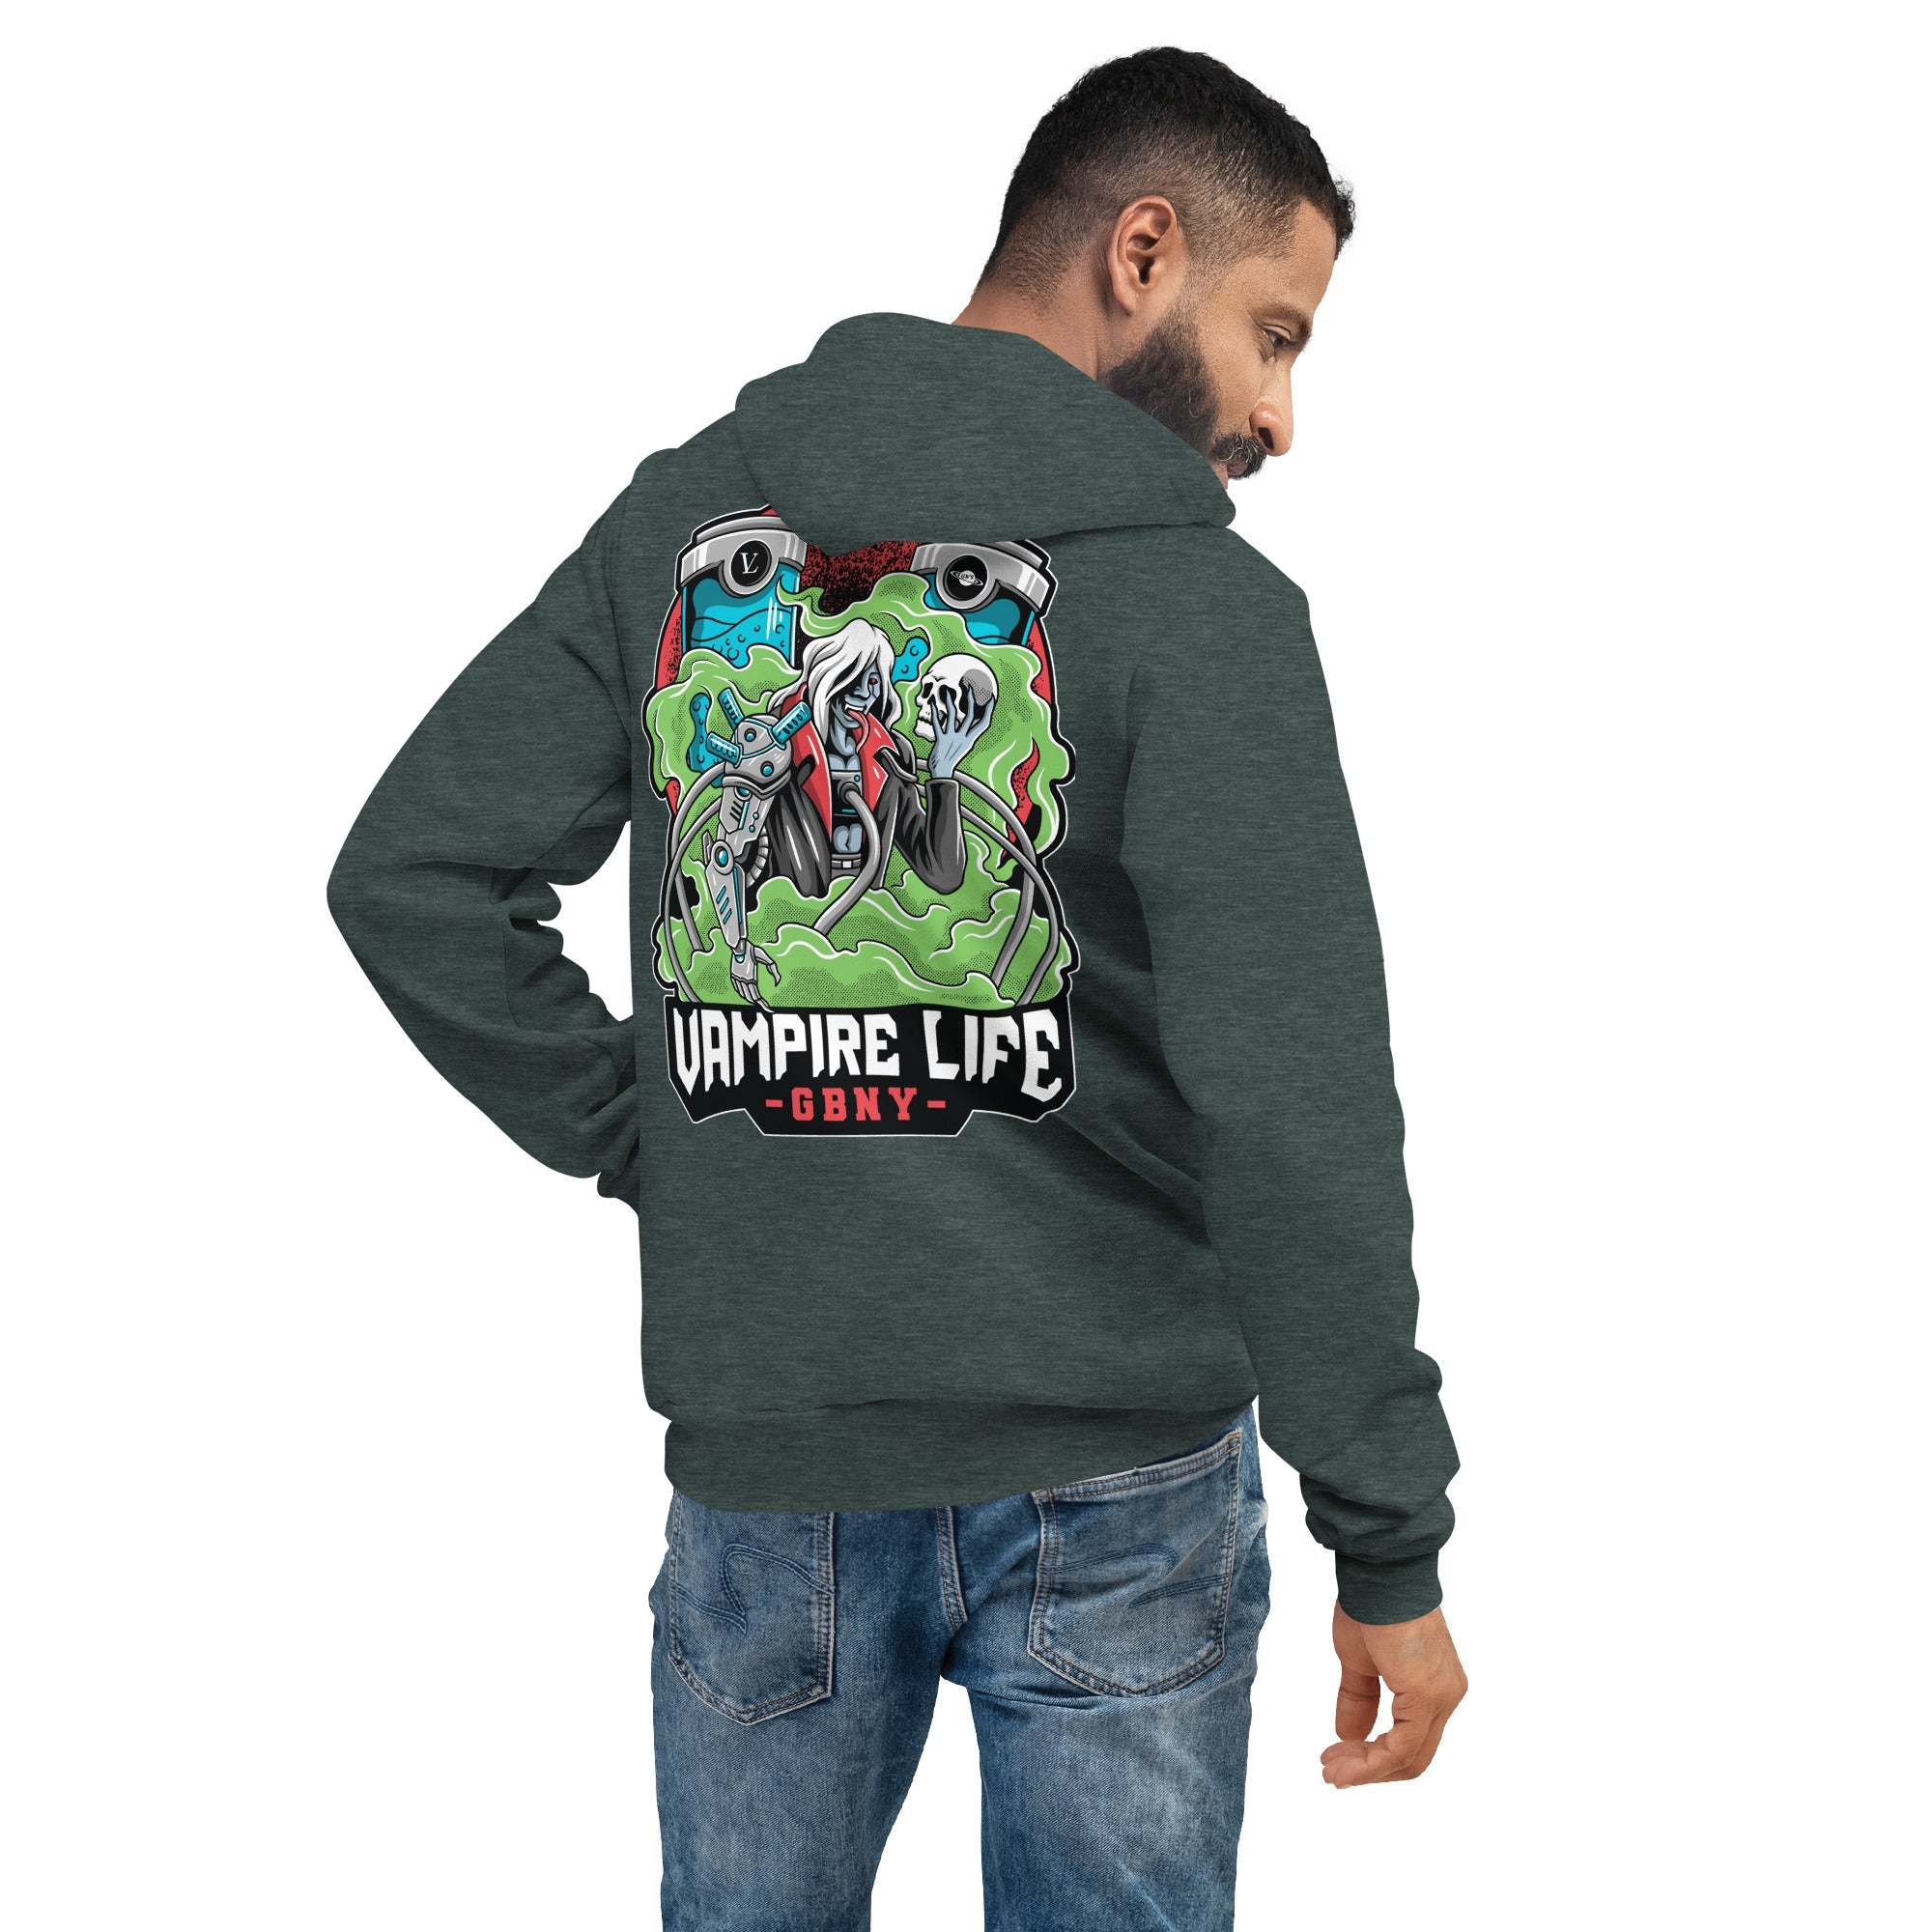 GBNY Heather Forest / S Vamp Life X GBNY "Cyber Punk Vamp" Super Soft Hoodie - Men's 1778637_9245